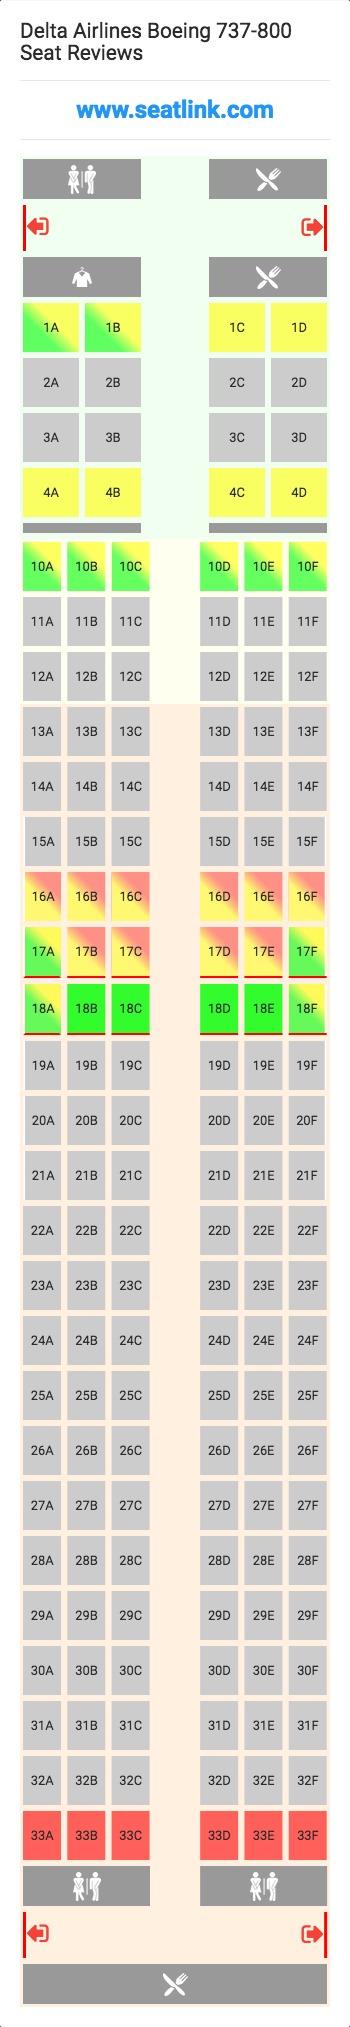 Boeing 737 900 Seating Chart Delta